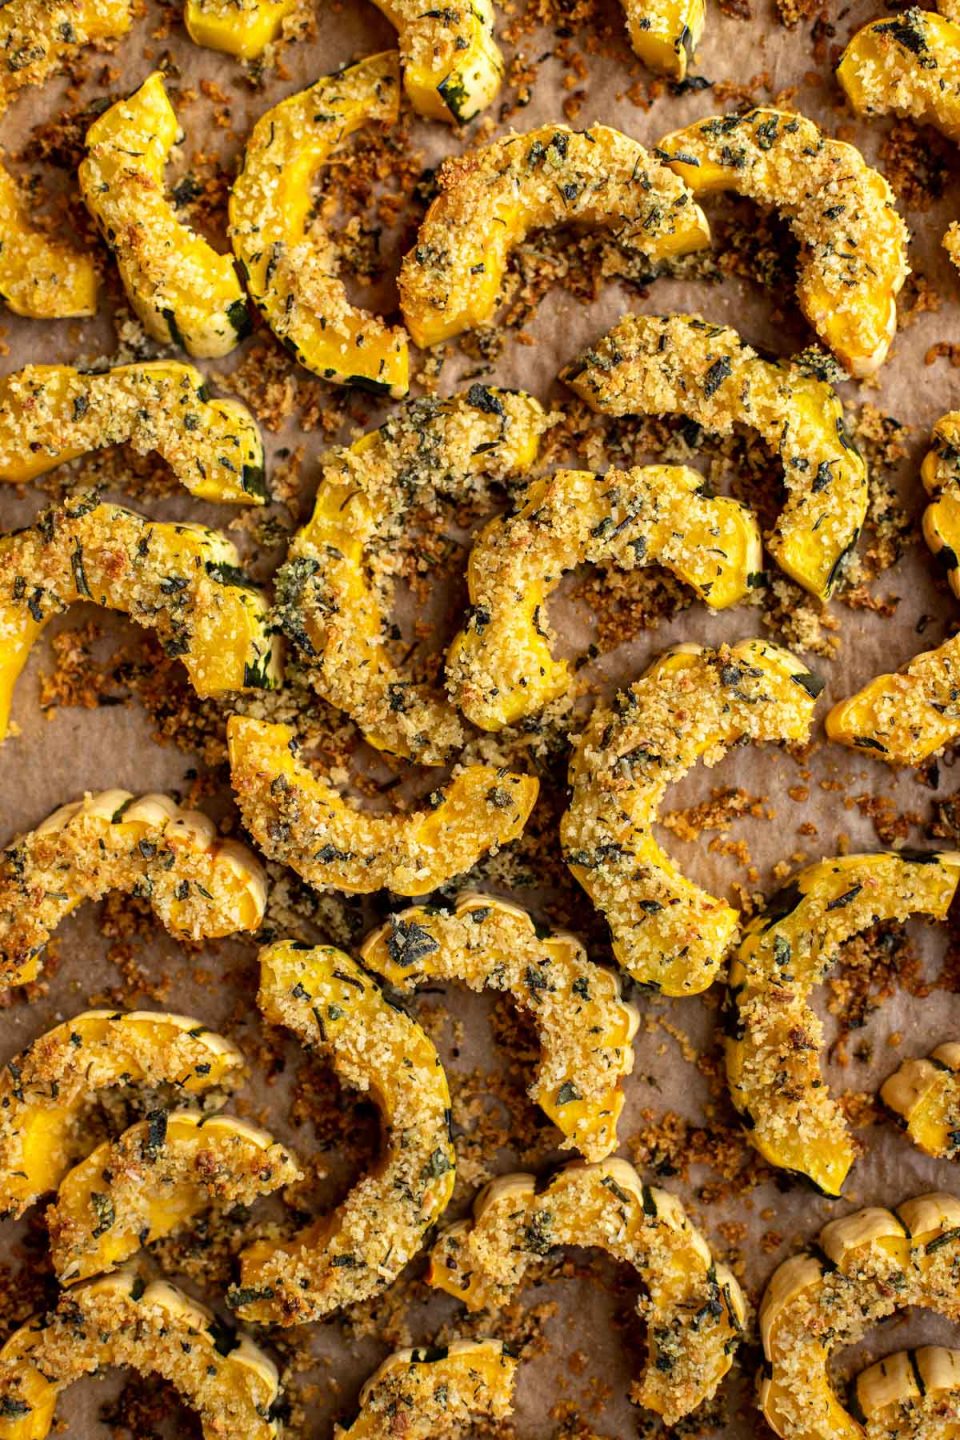 Parmesan Crusted Roasted Delicata Squash arranged on a piece of brown parchment paper.